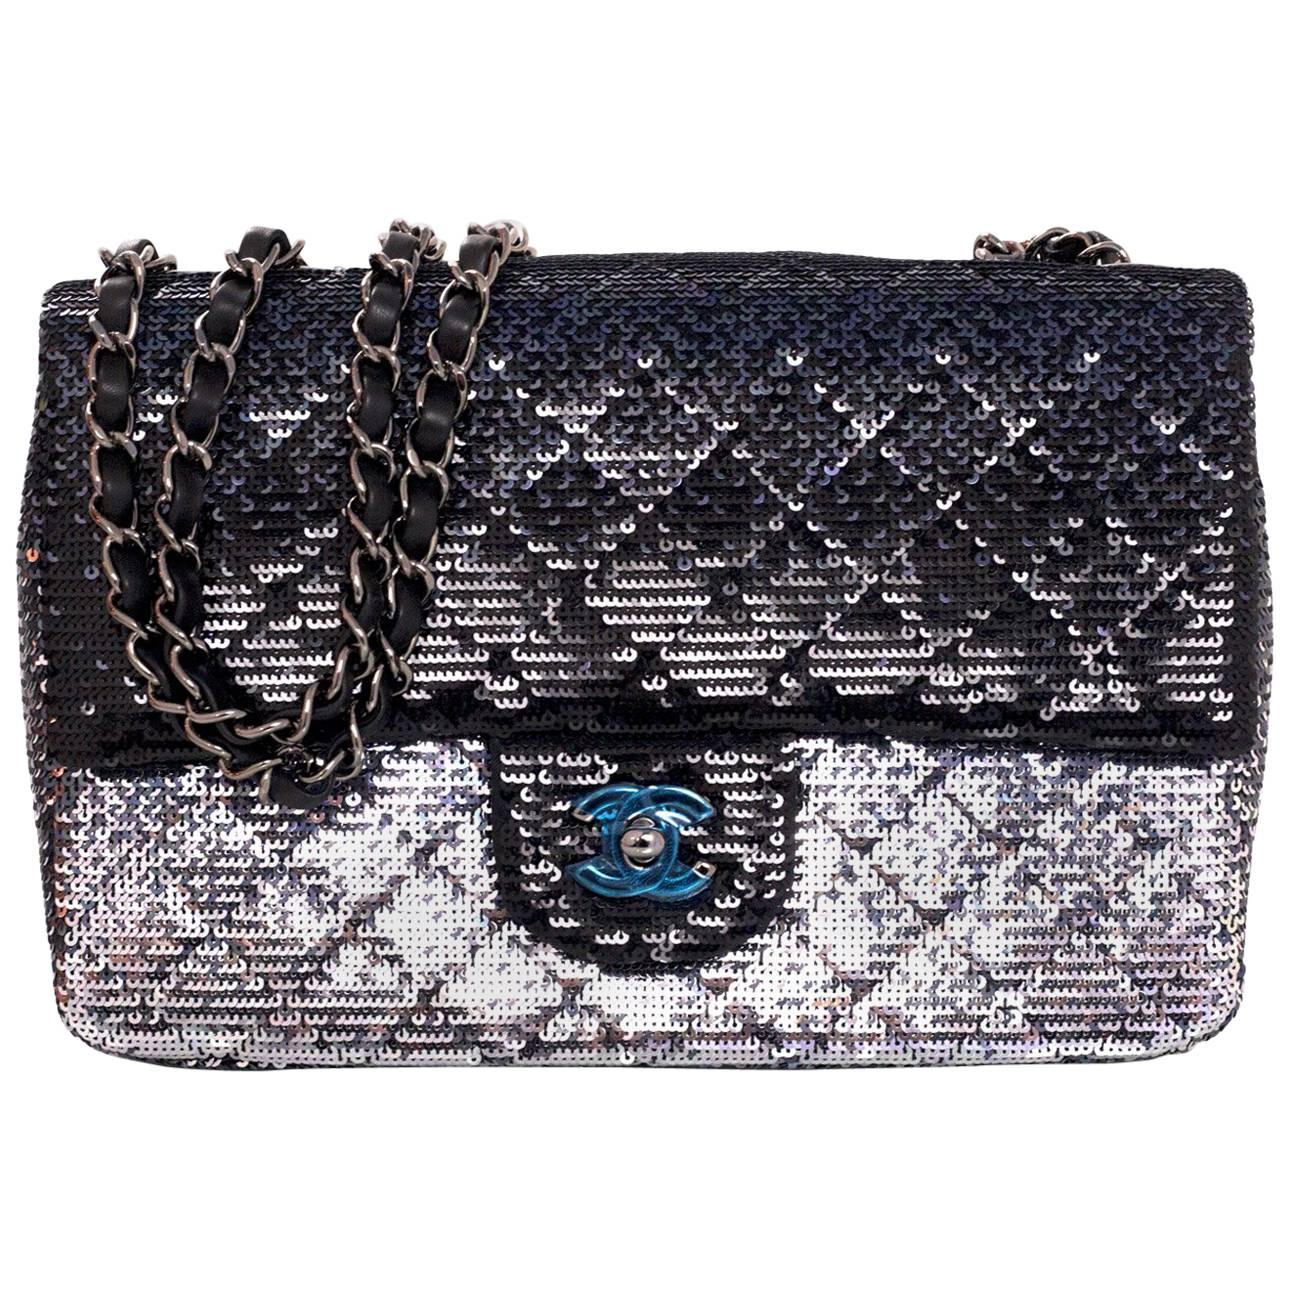 Chanel NEW IN BOX 2015 Black and Silver Ombre Sequin Flap Bag